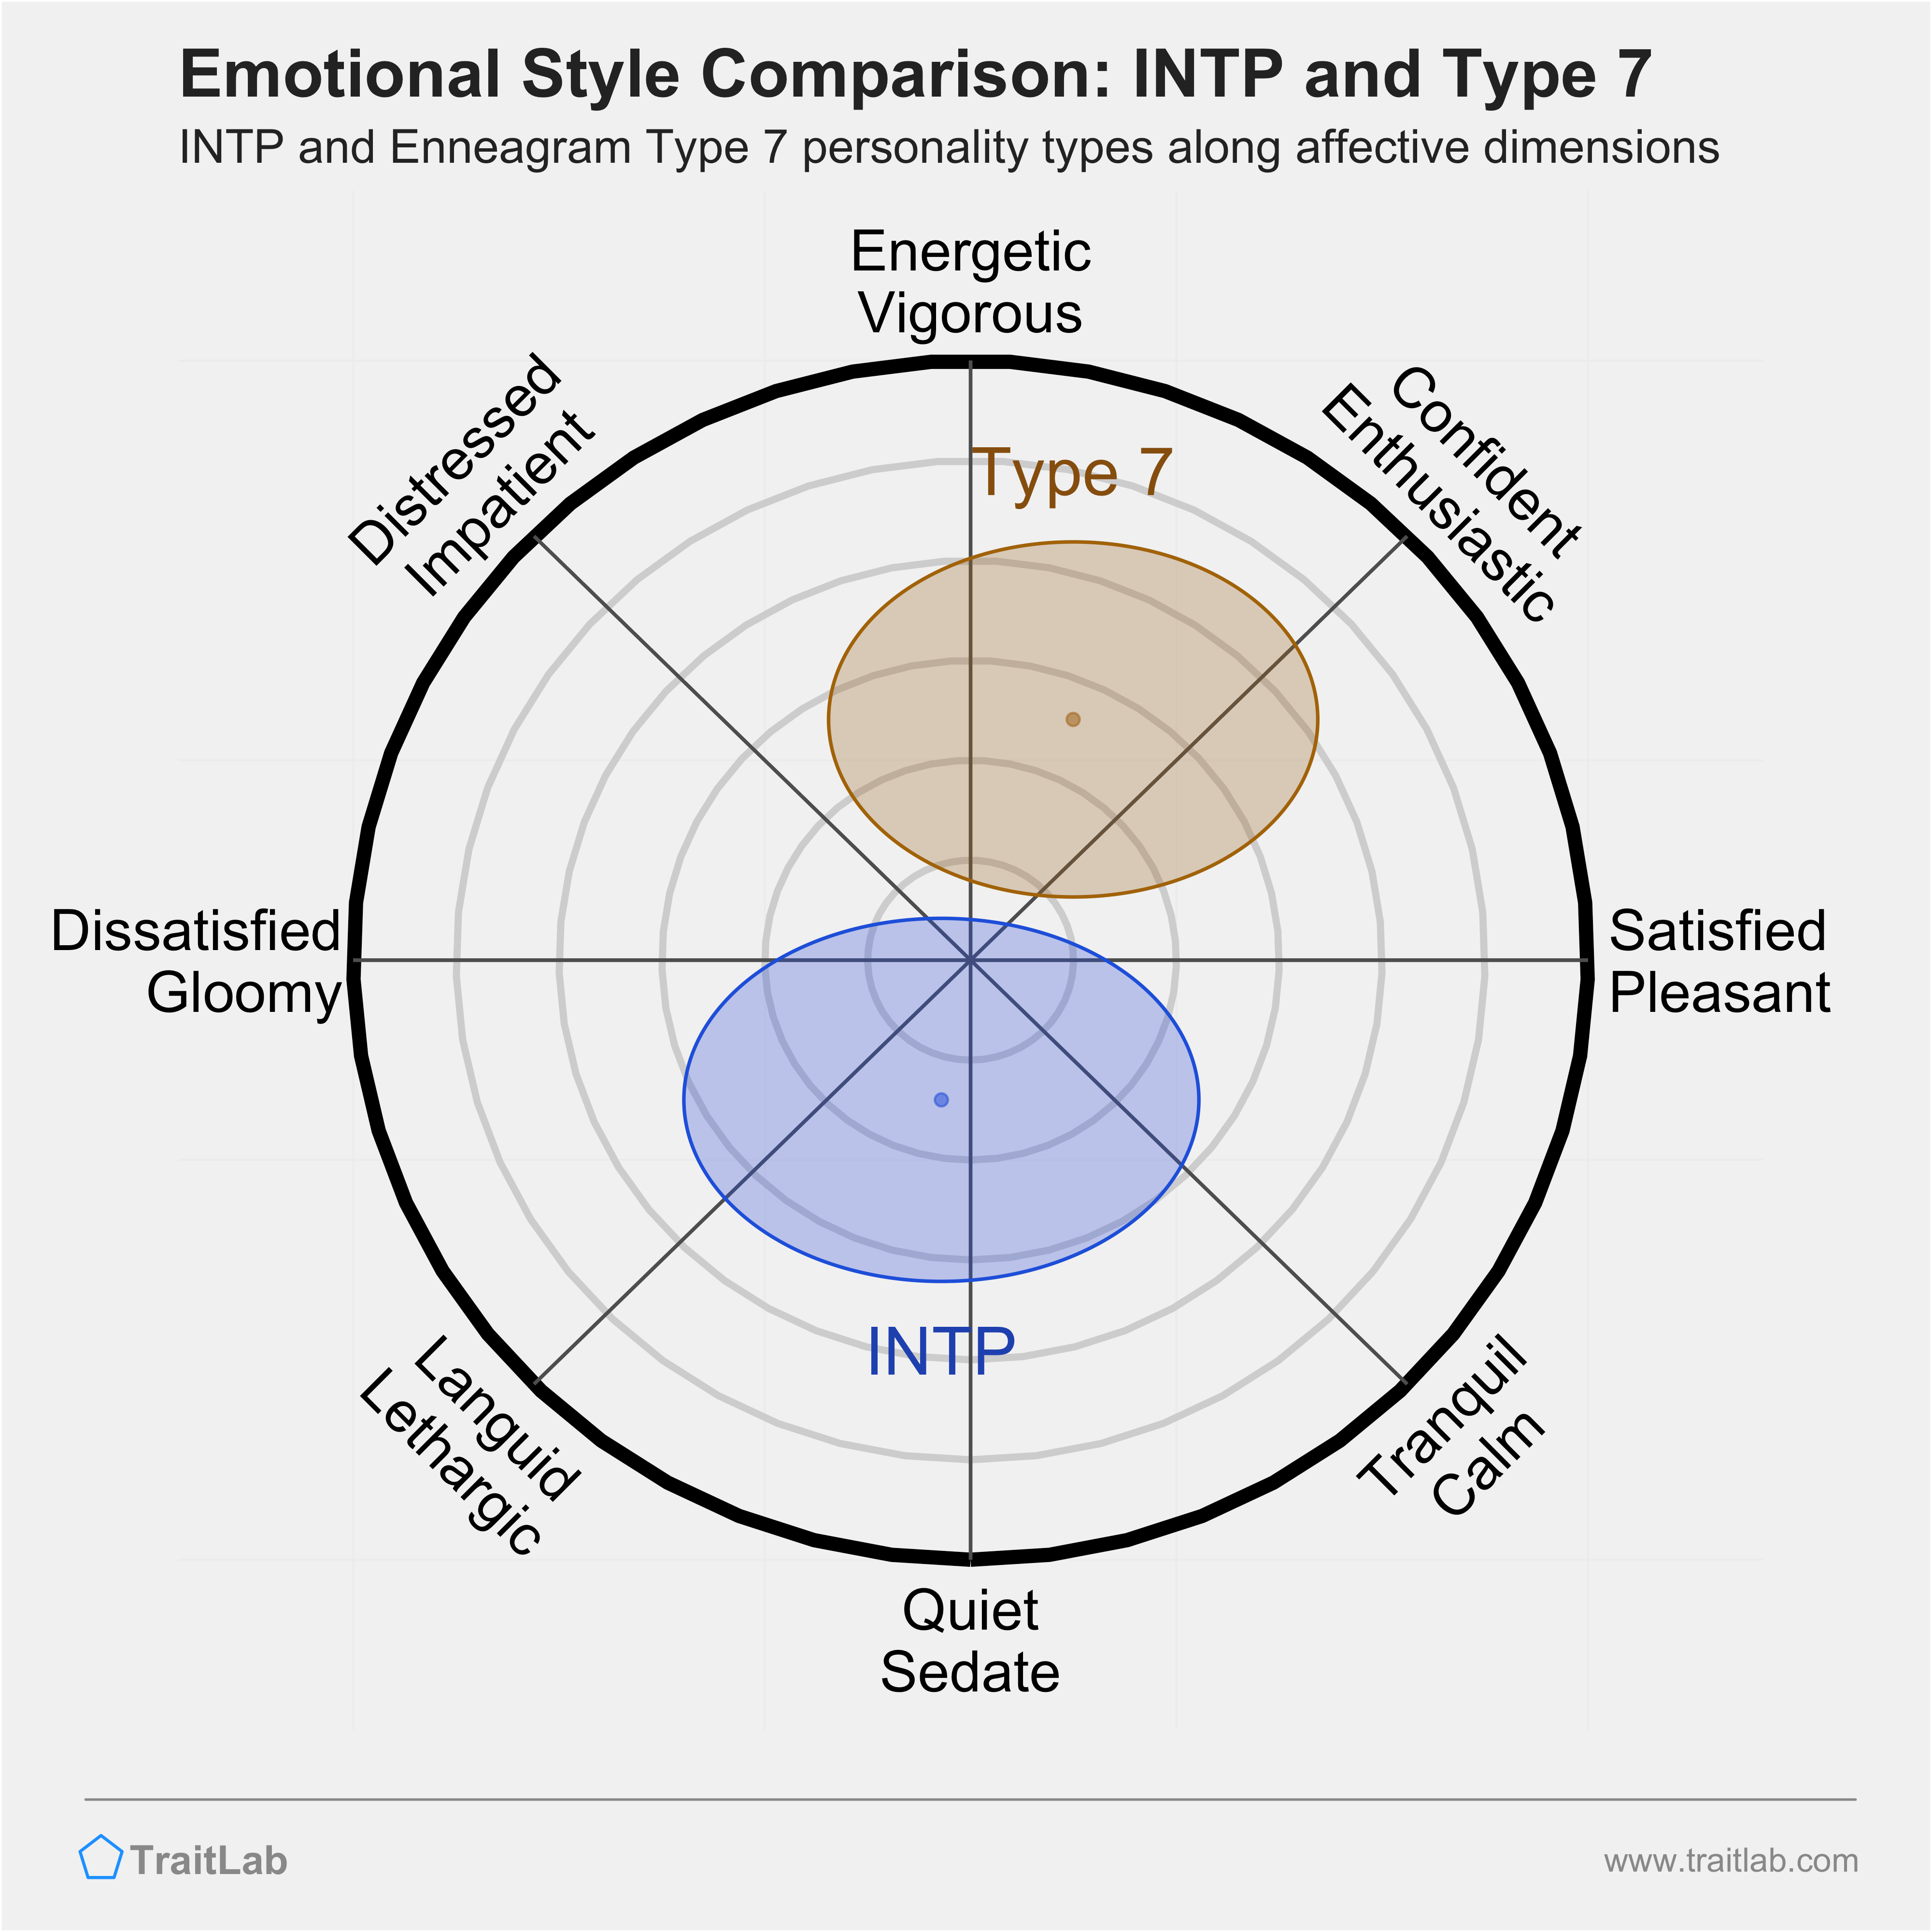 INTP and Type 7 comparison across emotional (affective) dimensions